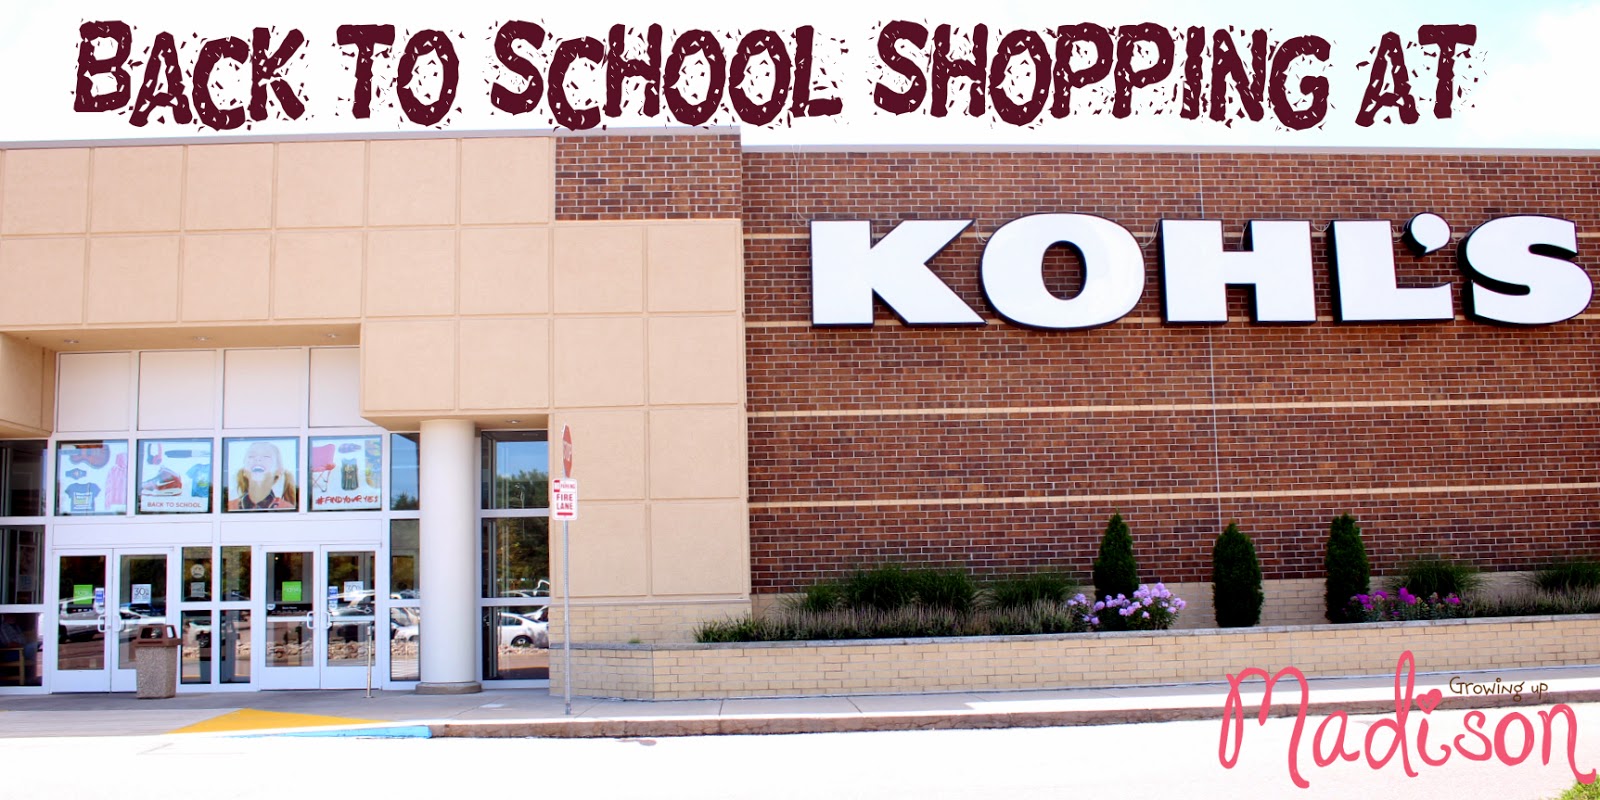 Get Your Back to School Shopping Done at Kohl's | Growing up Madison